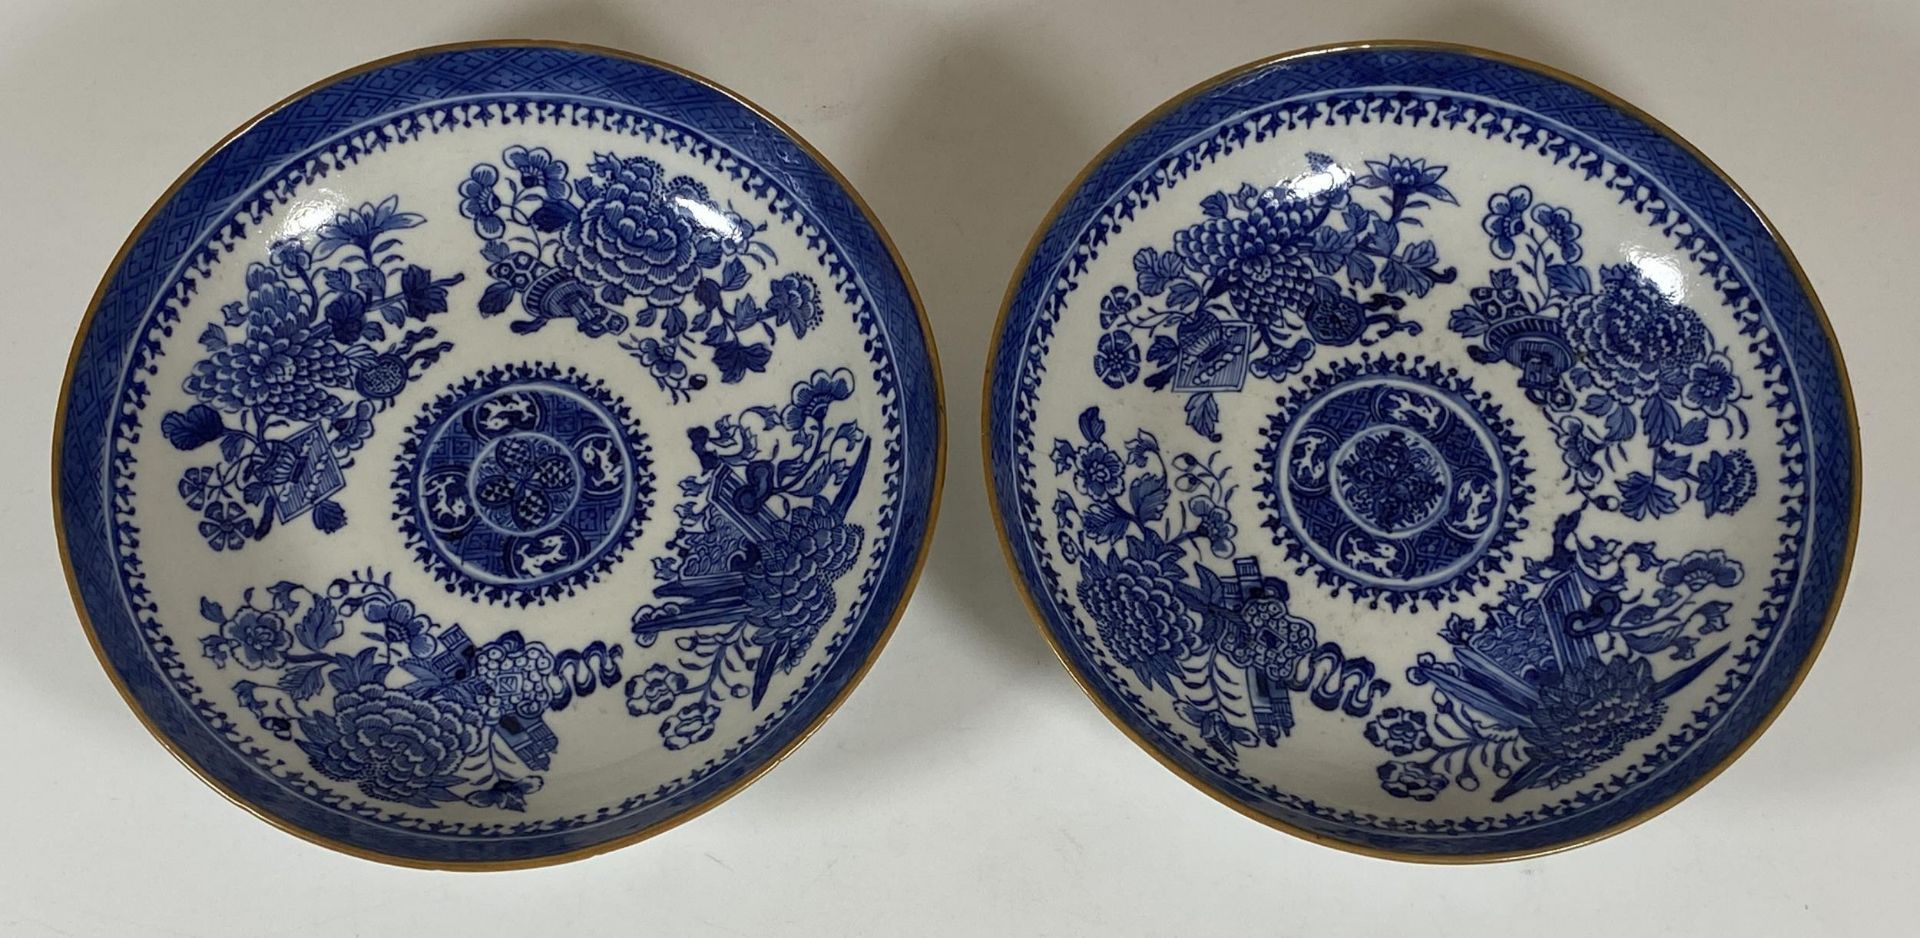 A PAIR OF 19TH CENTURY CHINESE BLUE AND WHITE PORCELAIN DISHES, DIAMETER 16CM